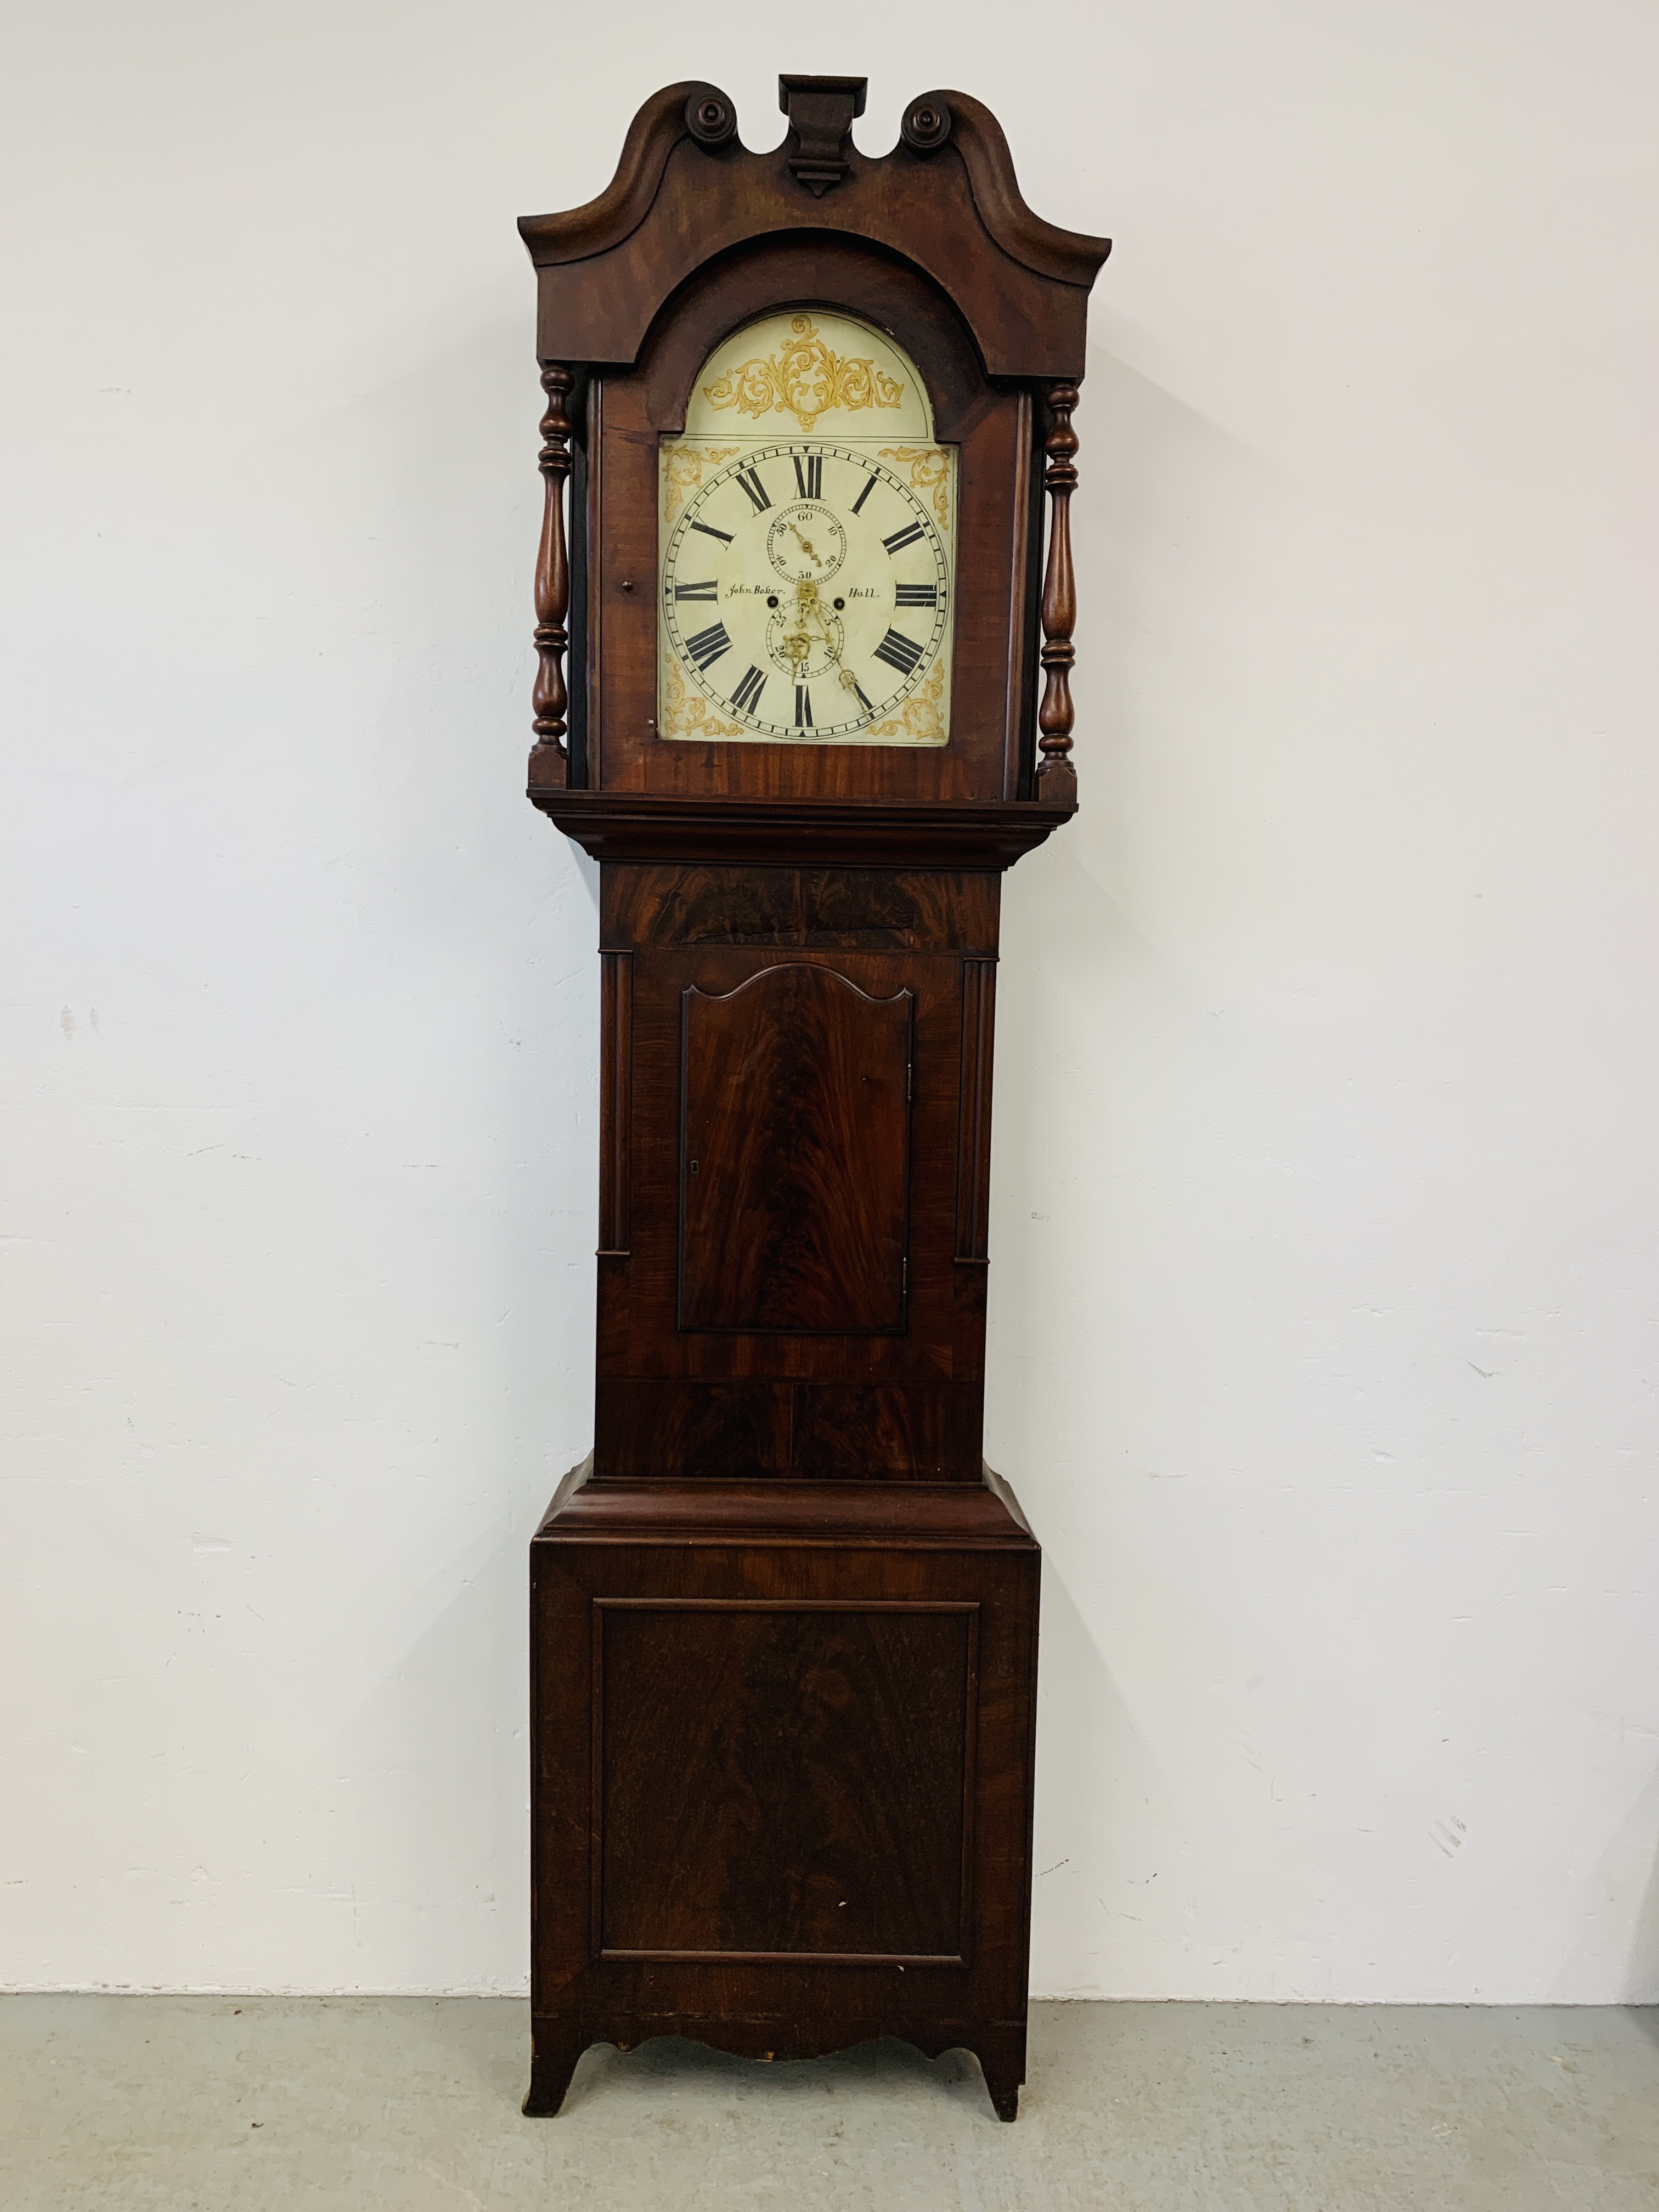 AN ANTIQUE MAHOGANY LONG CASE CLOCK THE HAND PAINTED ARCHED DIAL WITH ROMAN NUMERALS,